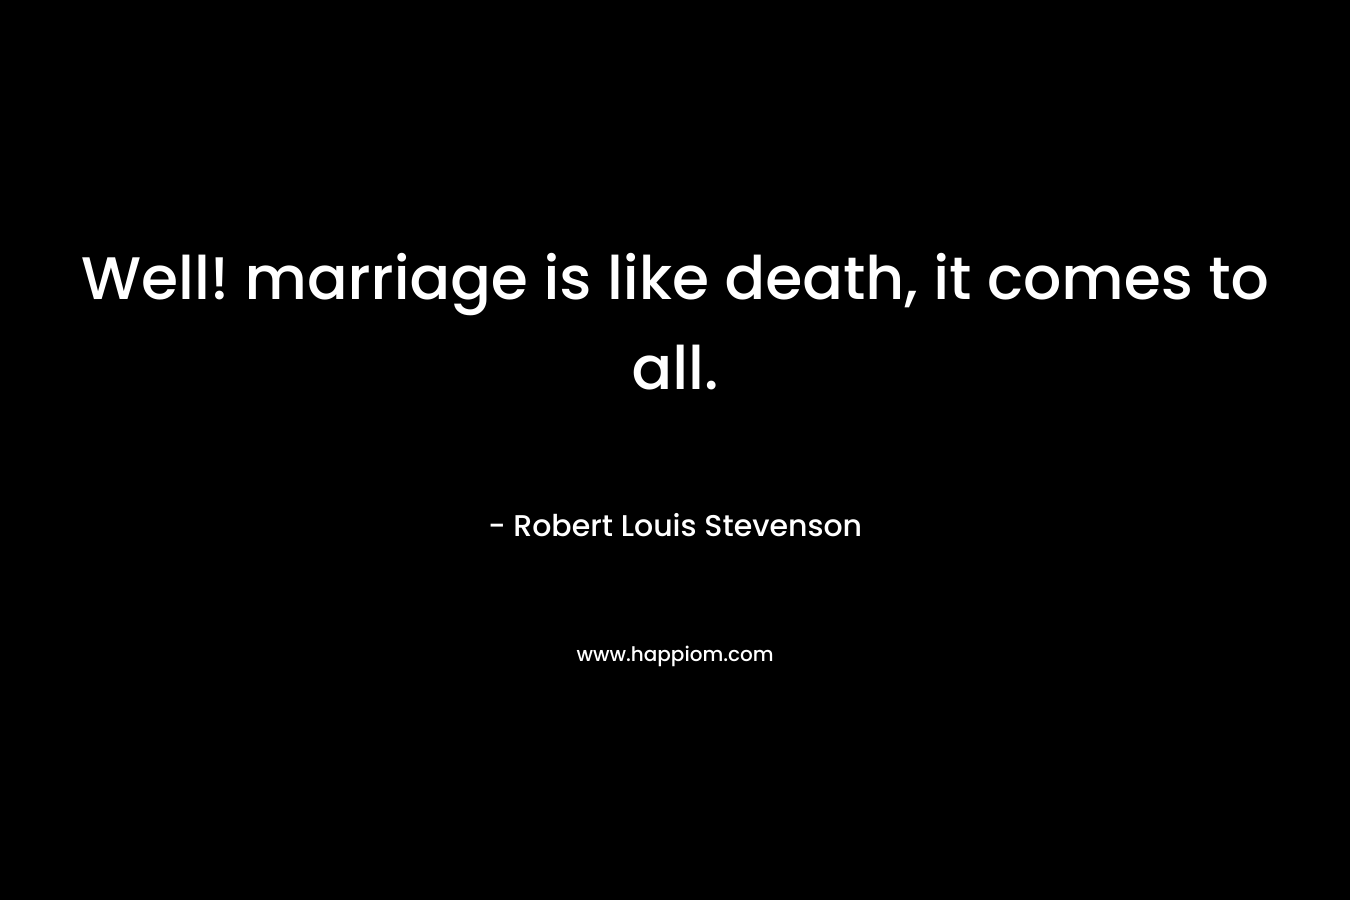 Well! marriage is like death, it comes to all.